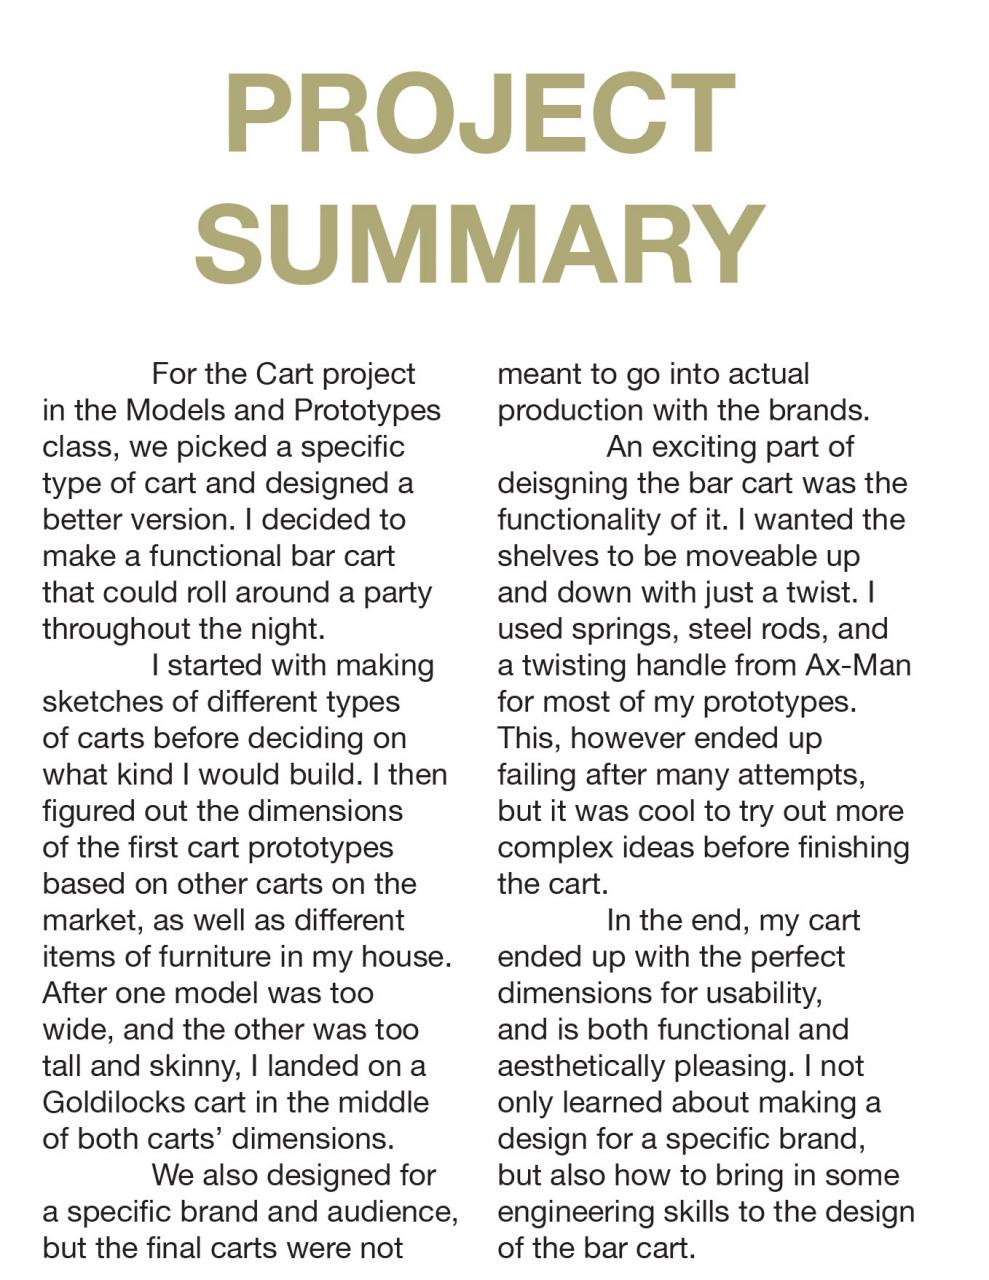 Project summary for wooden bar cart.